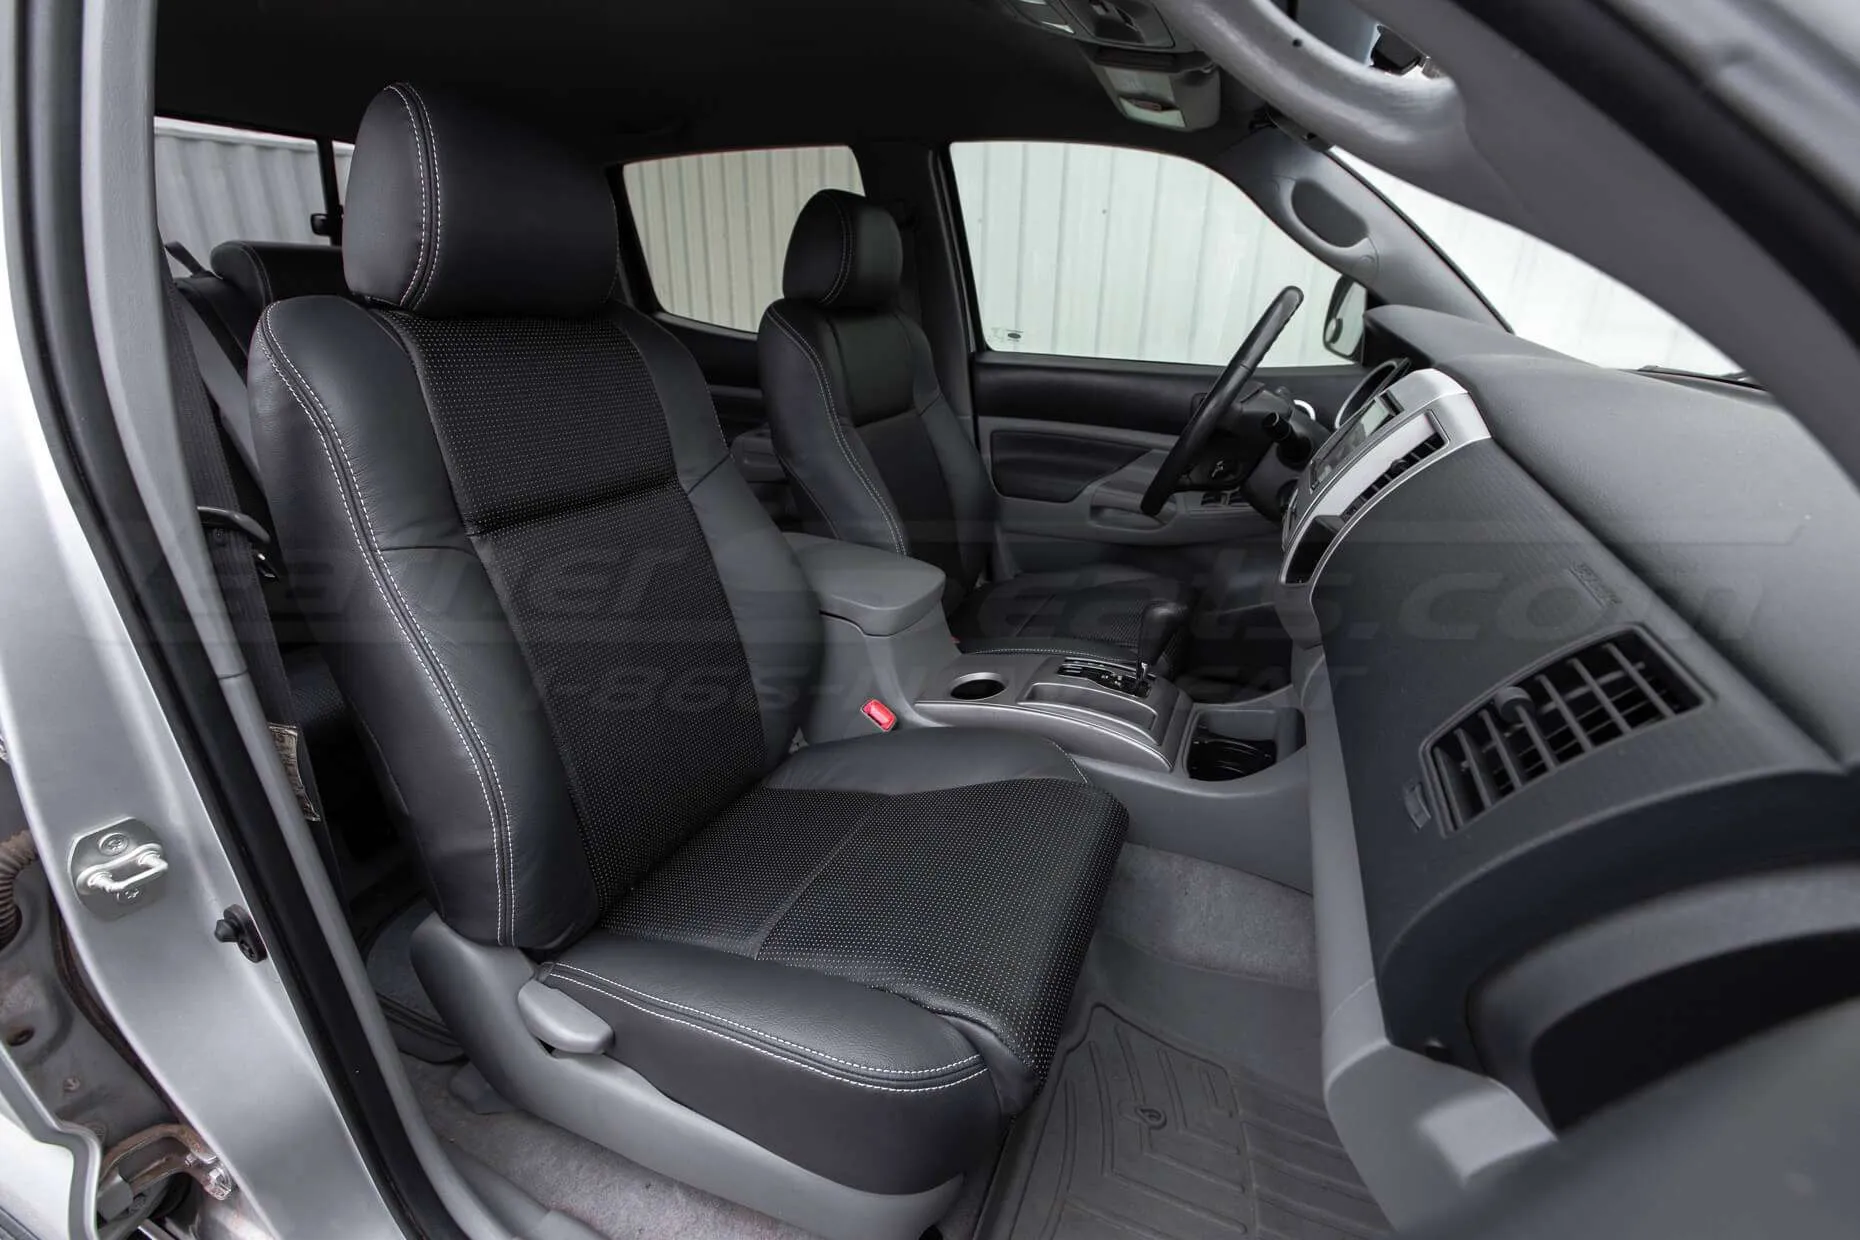 Toyota Tacoma Installed Leather Kit - Black - Installed -Front interior from passenger side